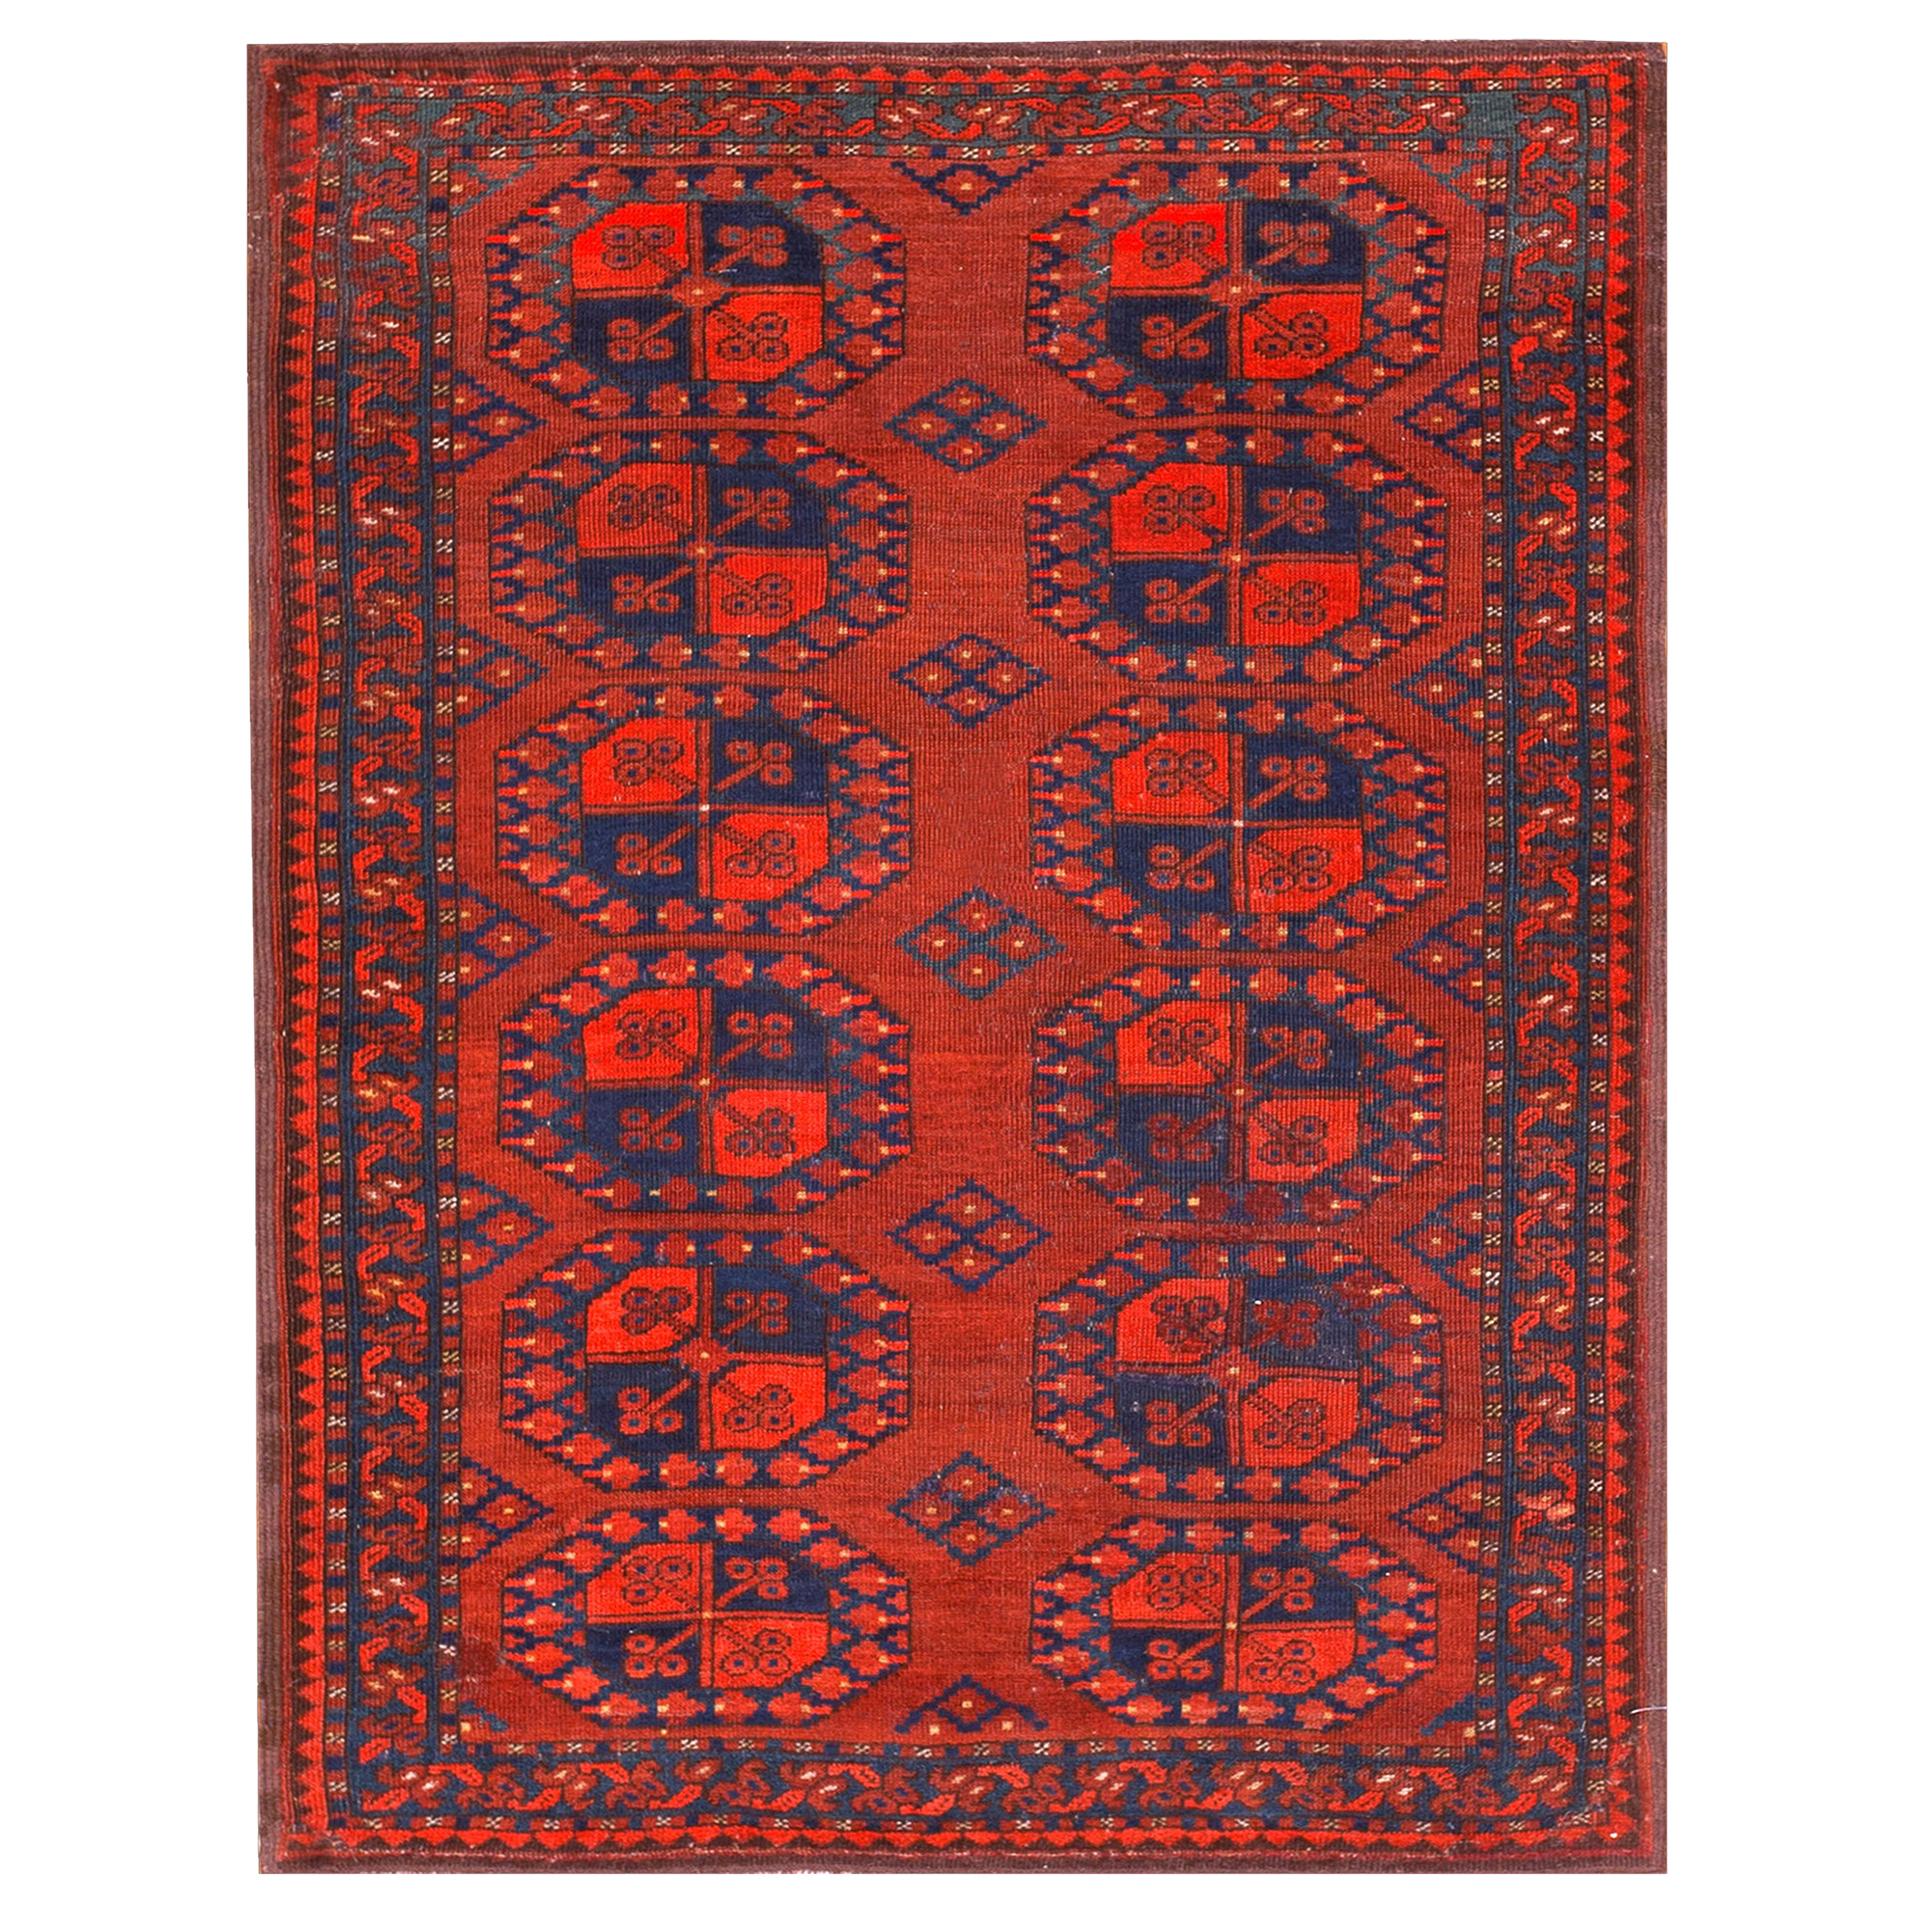 Early 20th Century Baluch Rug ( 3'6" x 4'6" - 106 x 137 ) For Sale